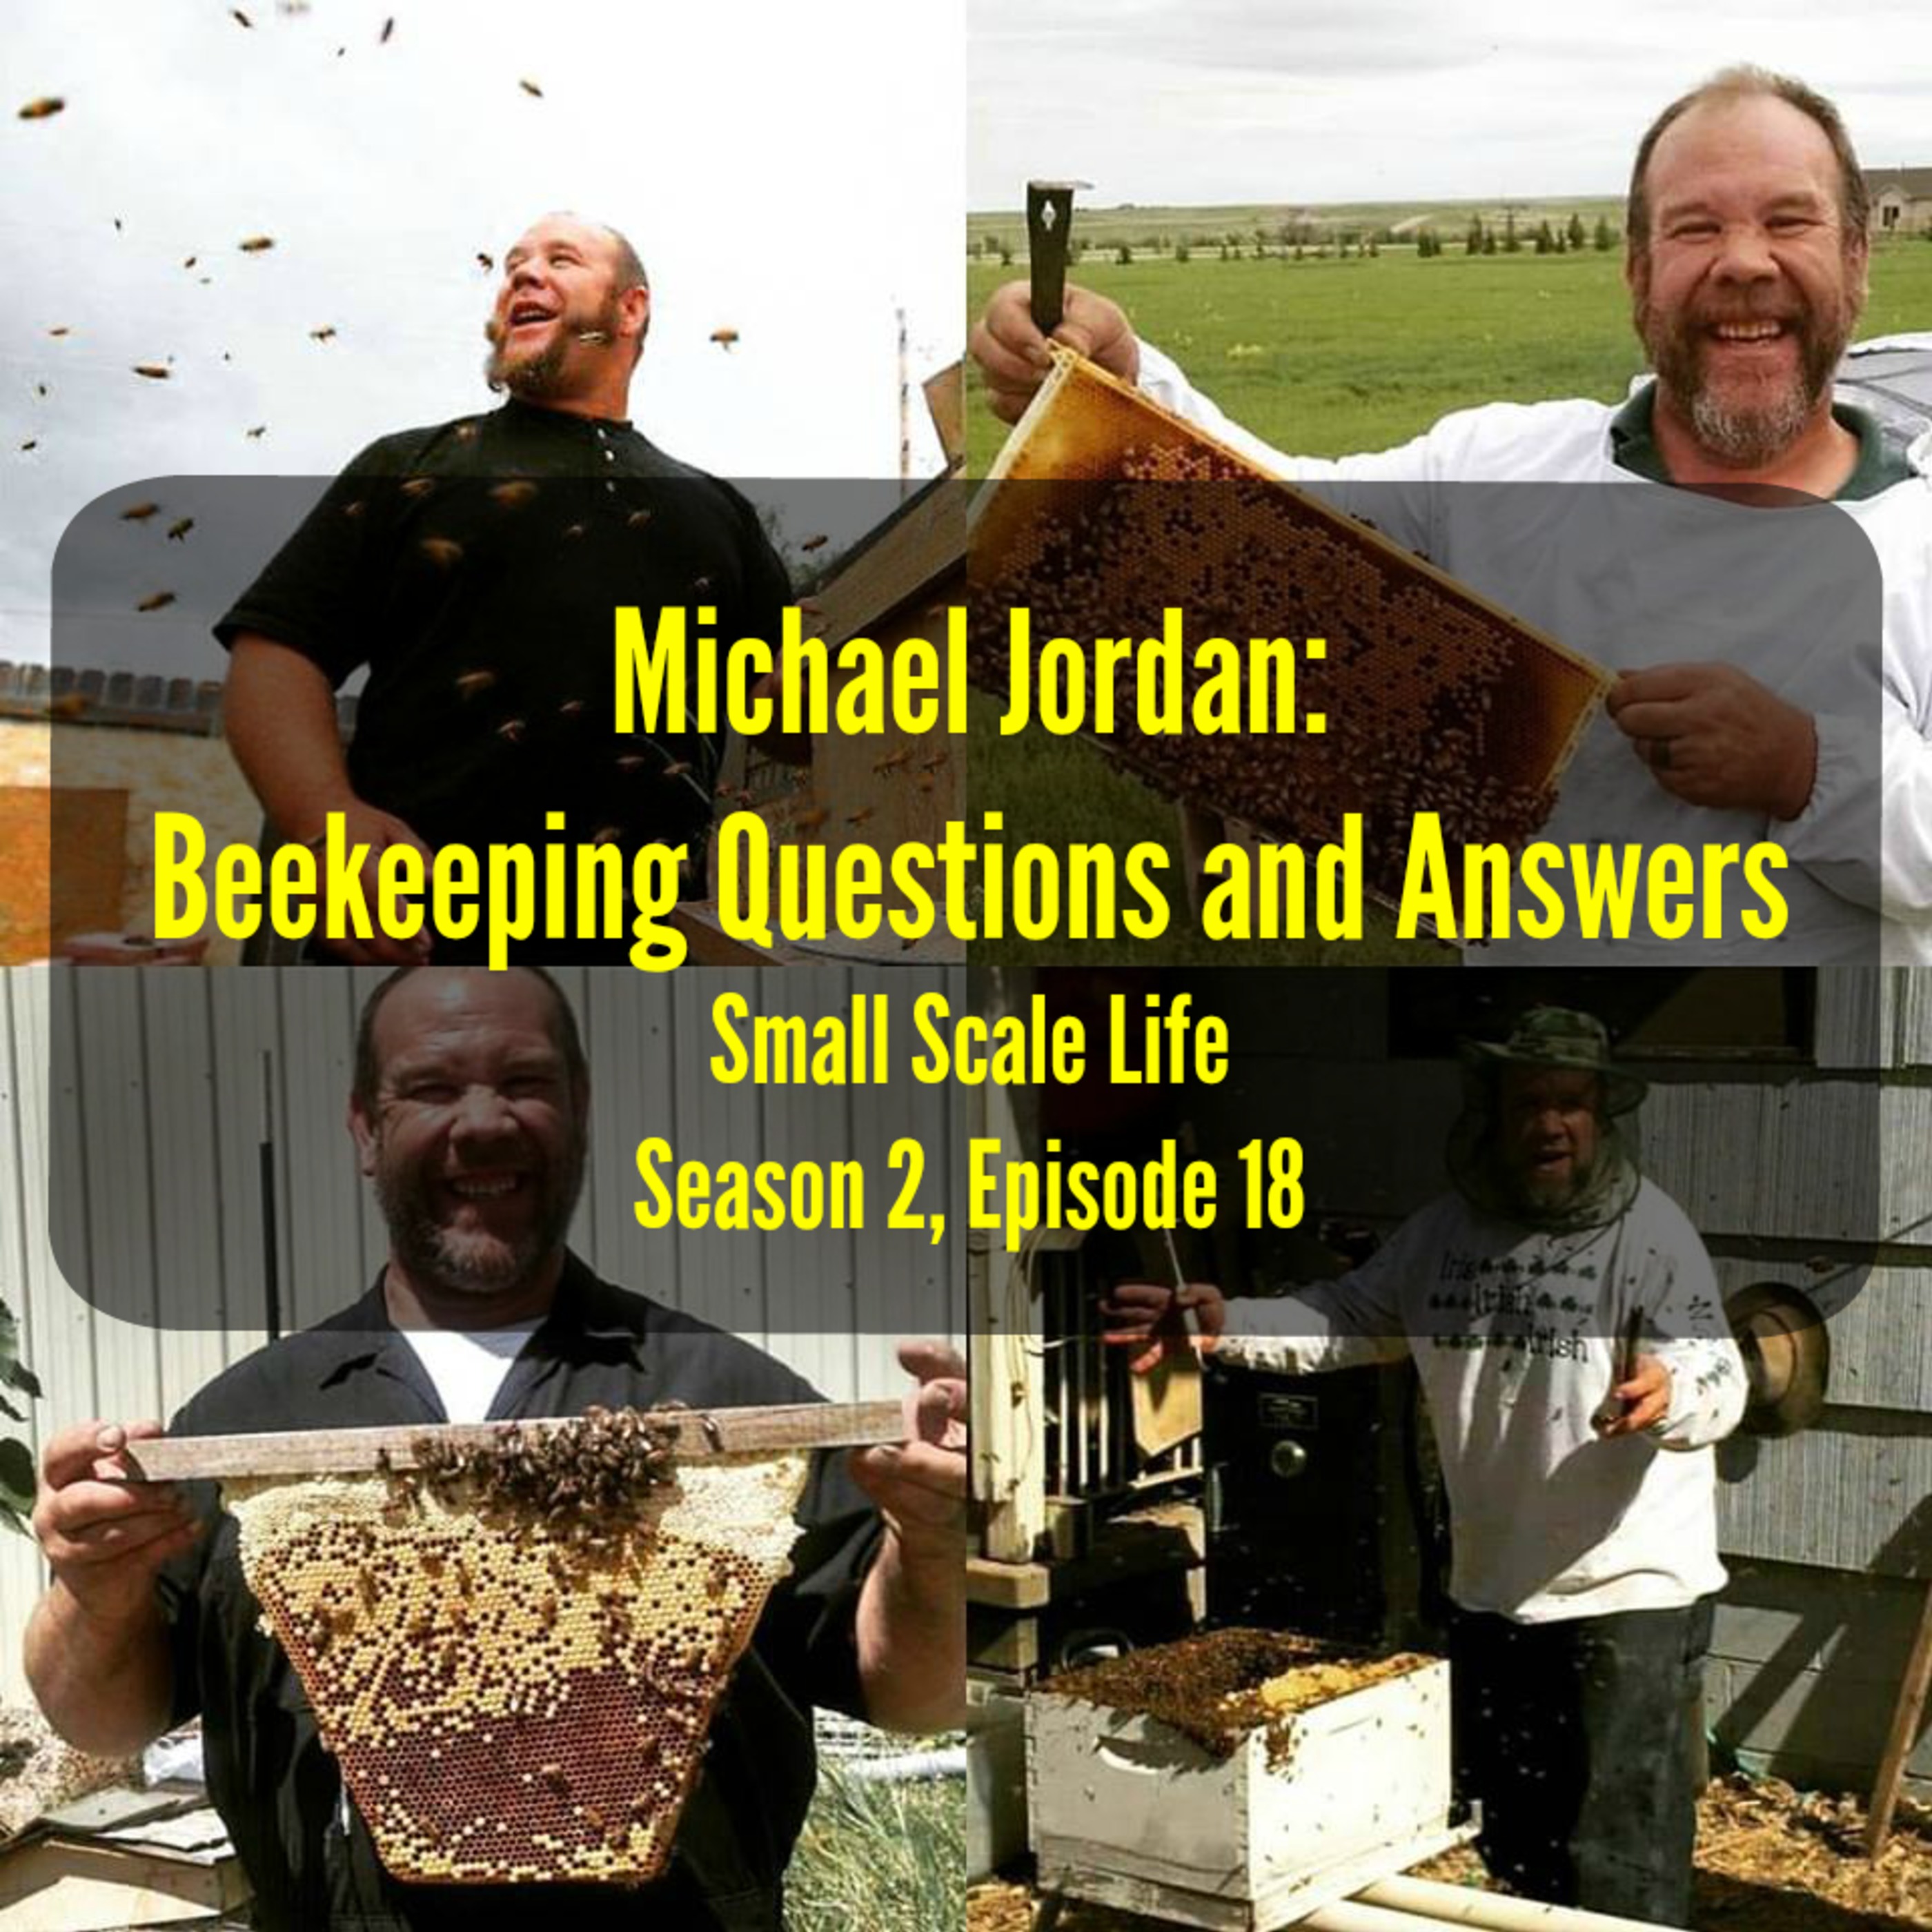 Michael Jordan: Beekeeping Questions and Answers - S2E18